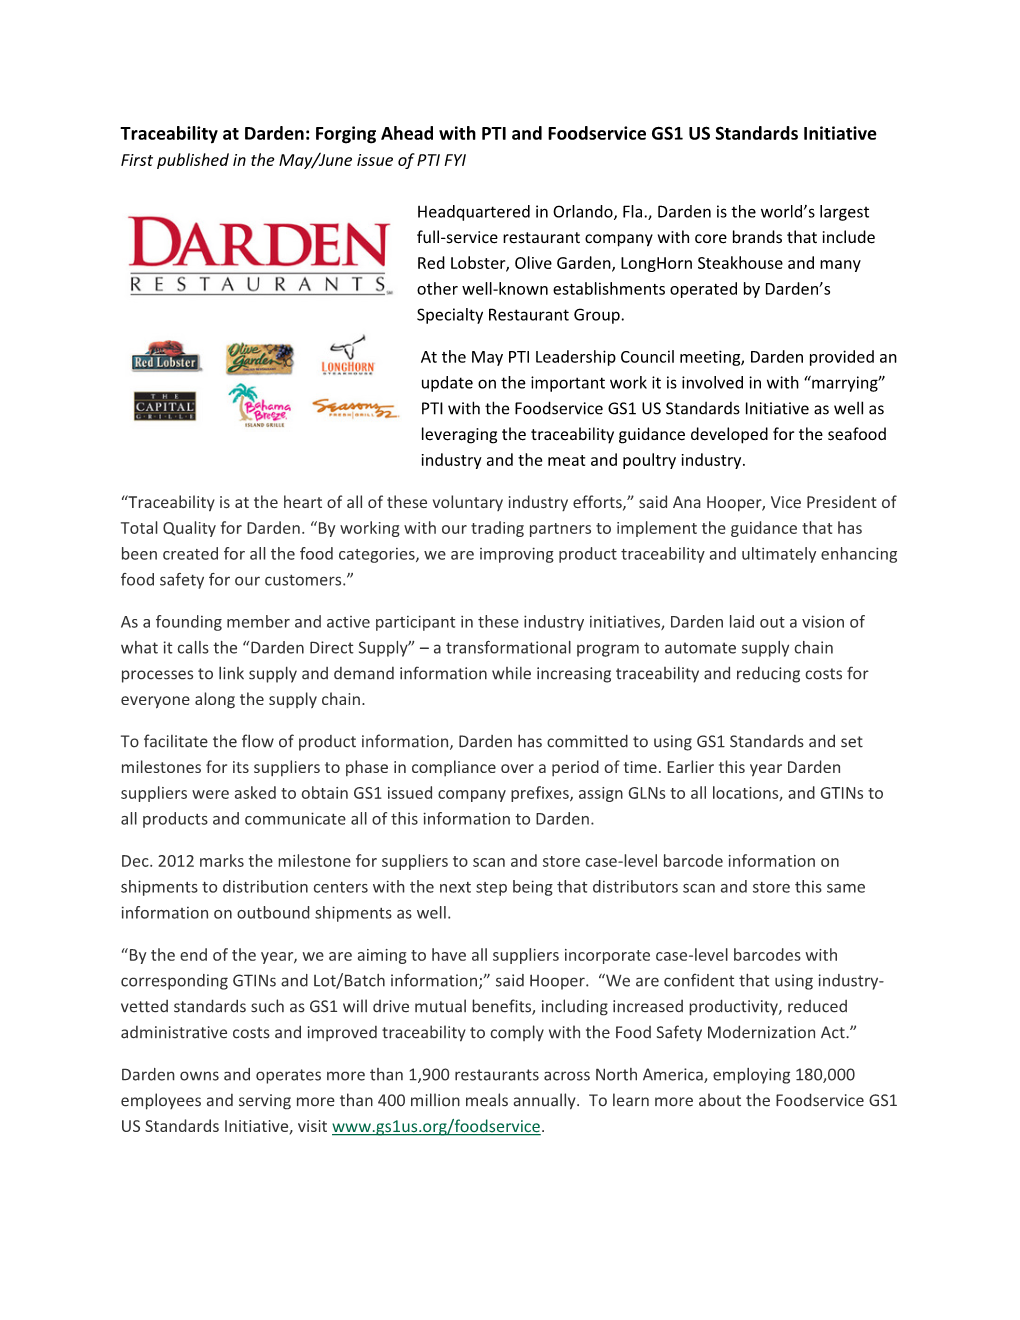 Traceability at Darden: Forging Ahead with PTI and Foodservice GS1 US Standards Initiative First Published in the May/June Issue of PTI FYI